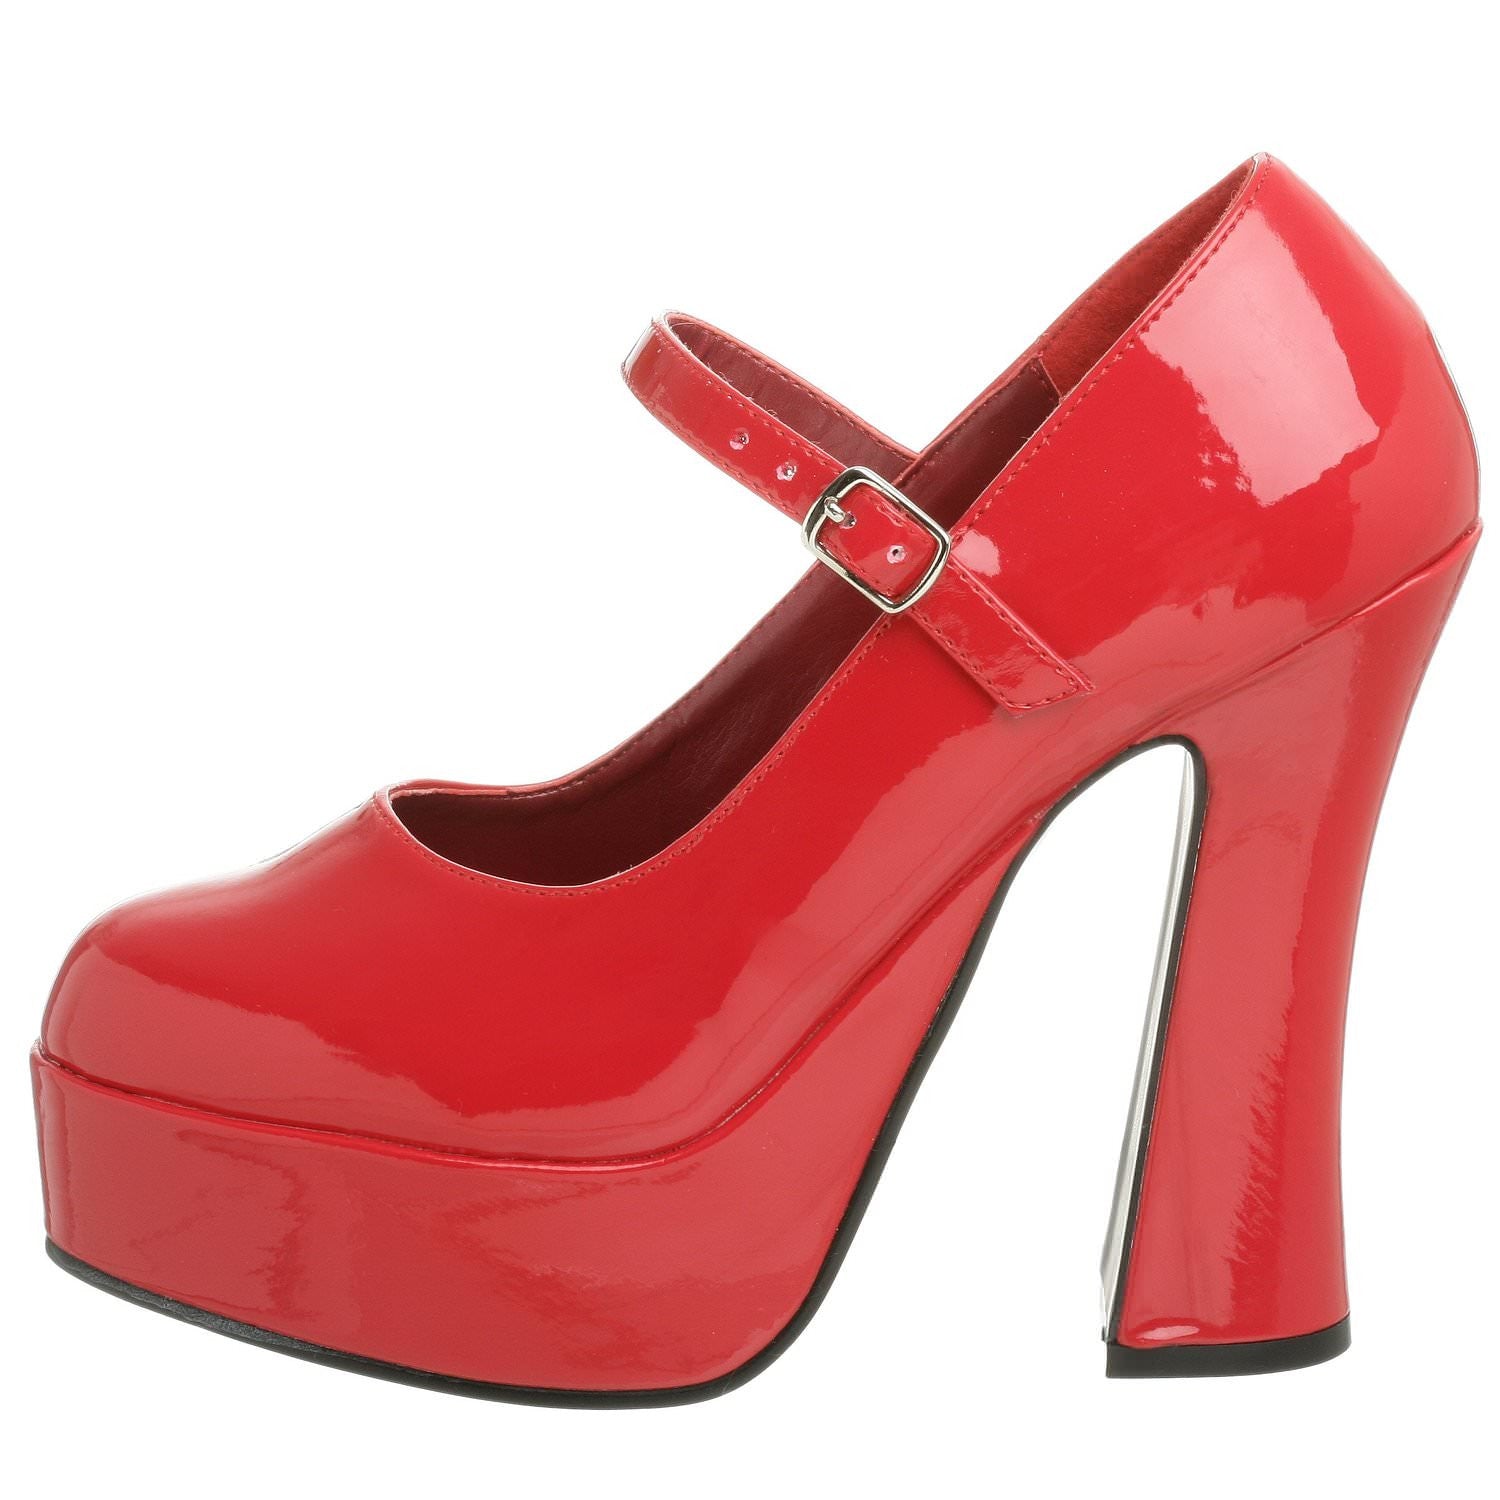 DEMONIA DOLLY-50 Red Pat Mary Jane Pumps - Shoecup.com - 4